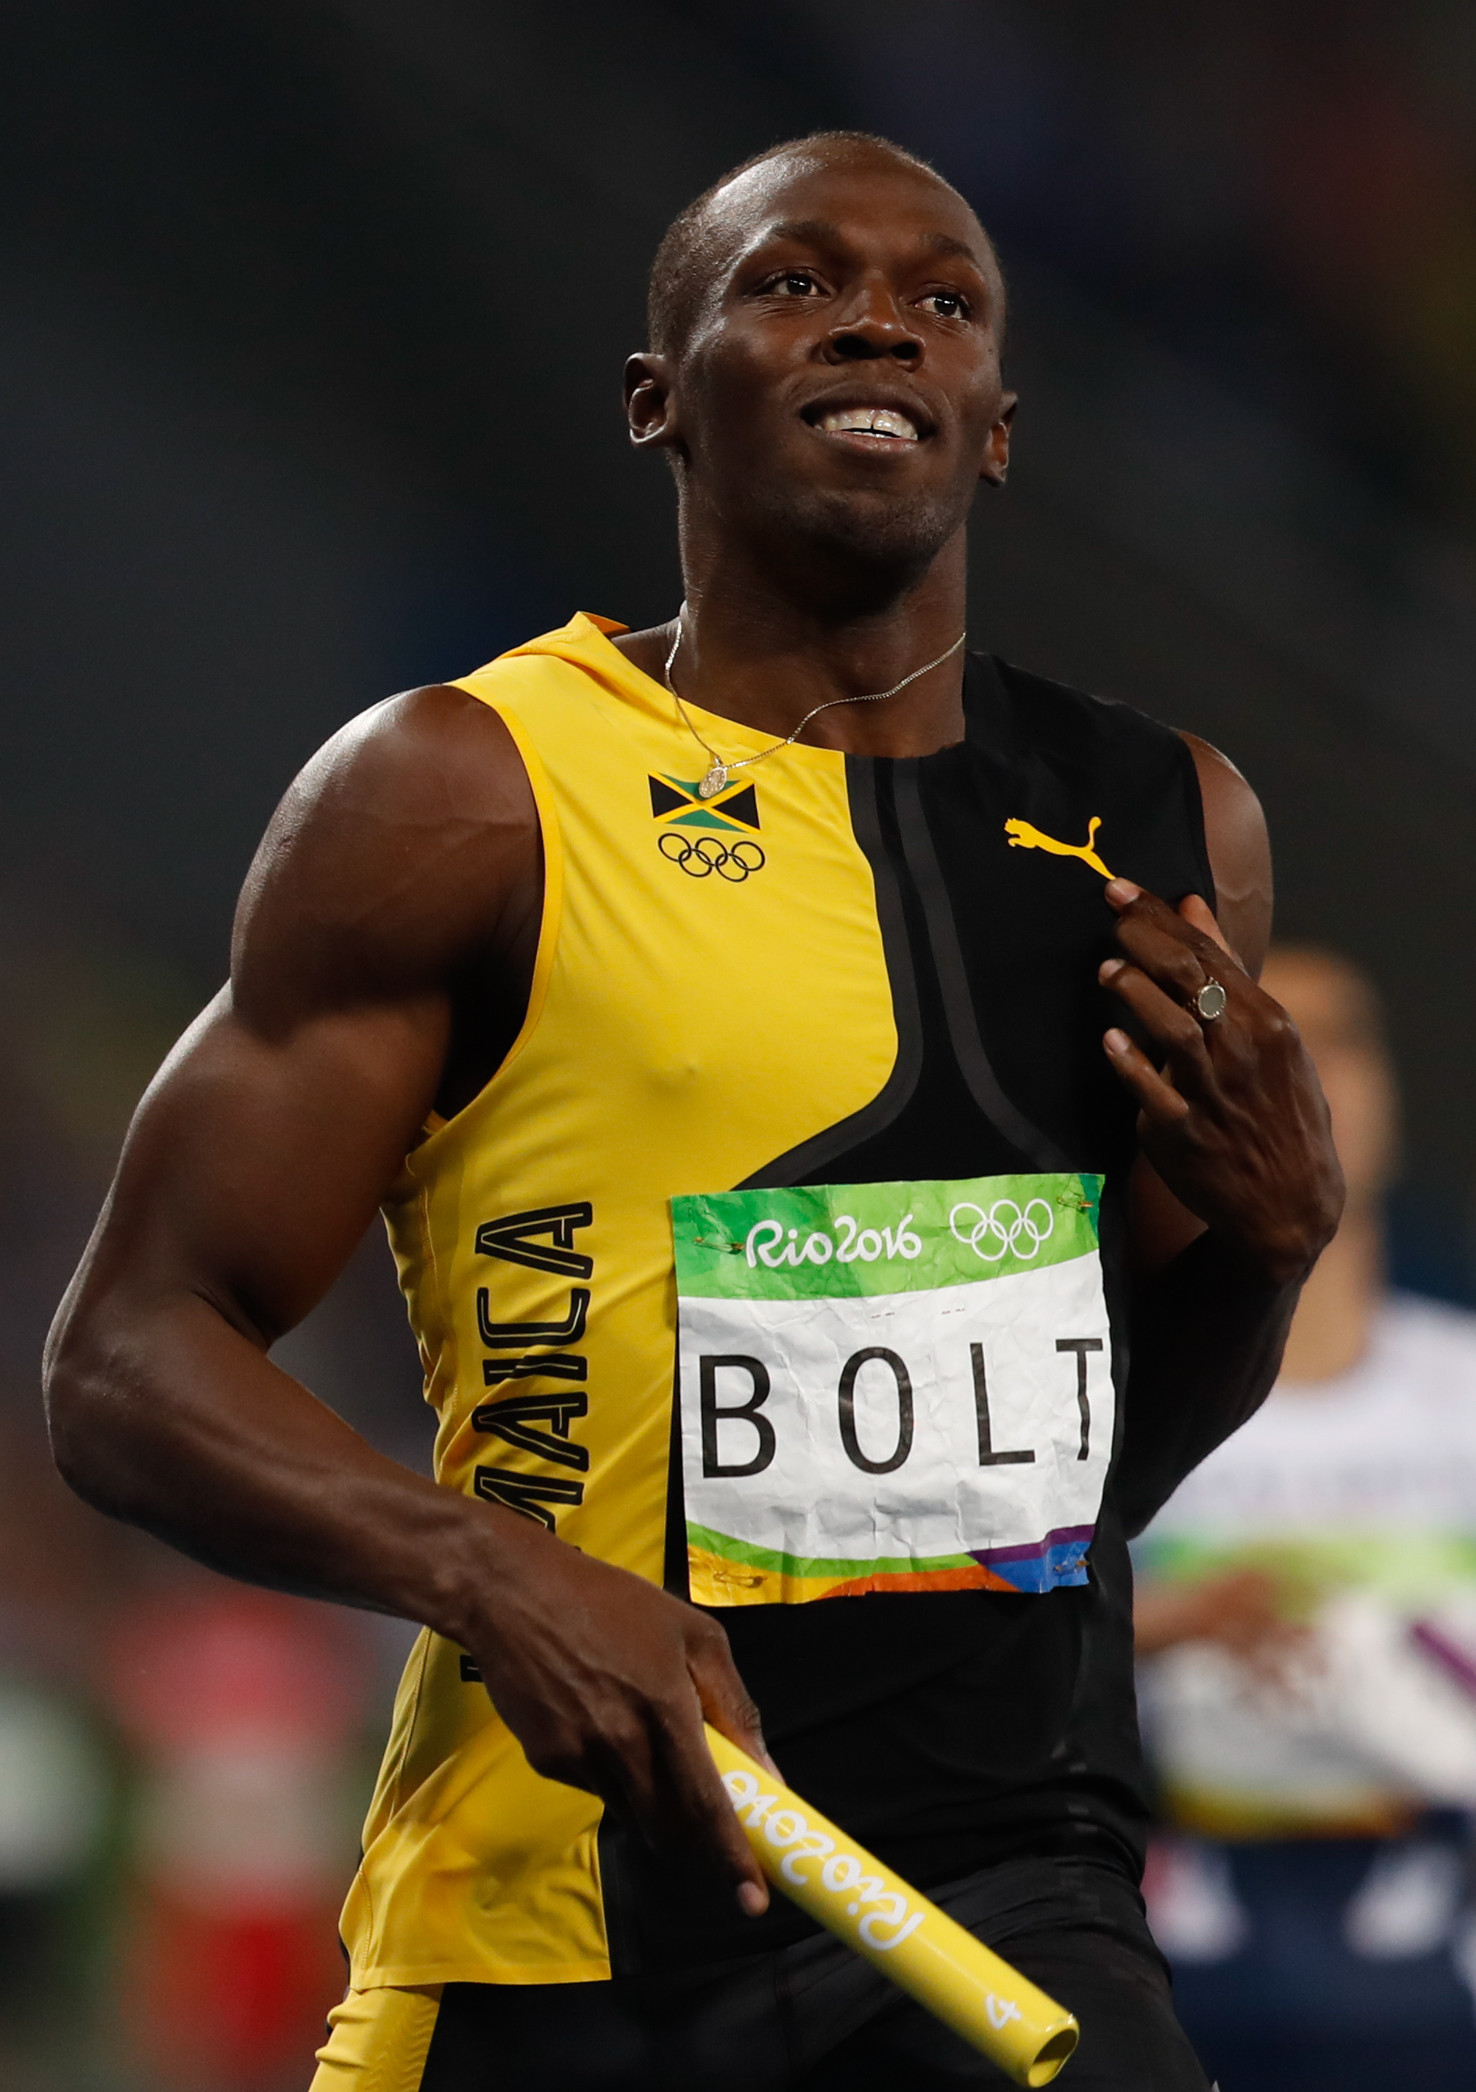 "Of the 30 fastest 100-meter sprint times, 21 were run by athletes who tested positive for performance-enhancing drugs. The other 9 were Usain Bolt."